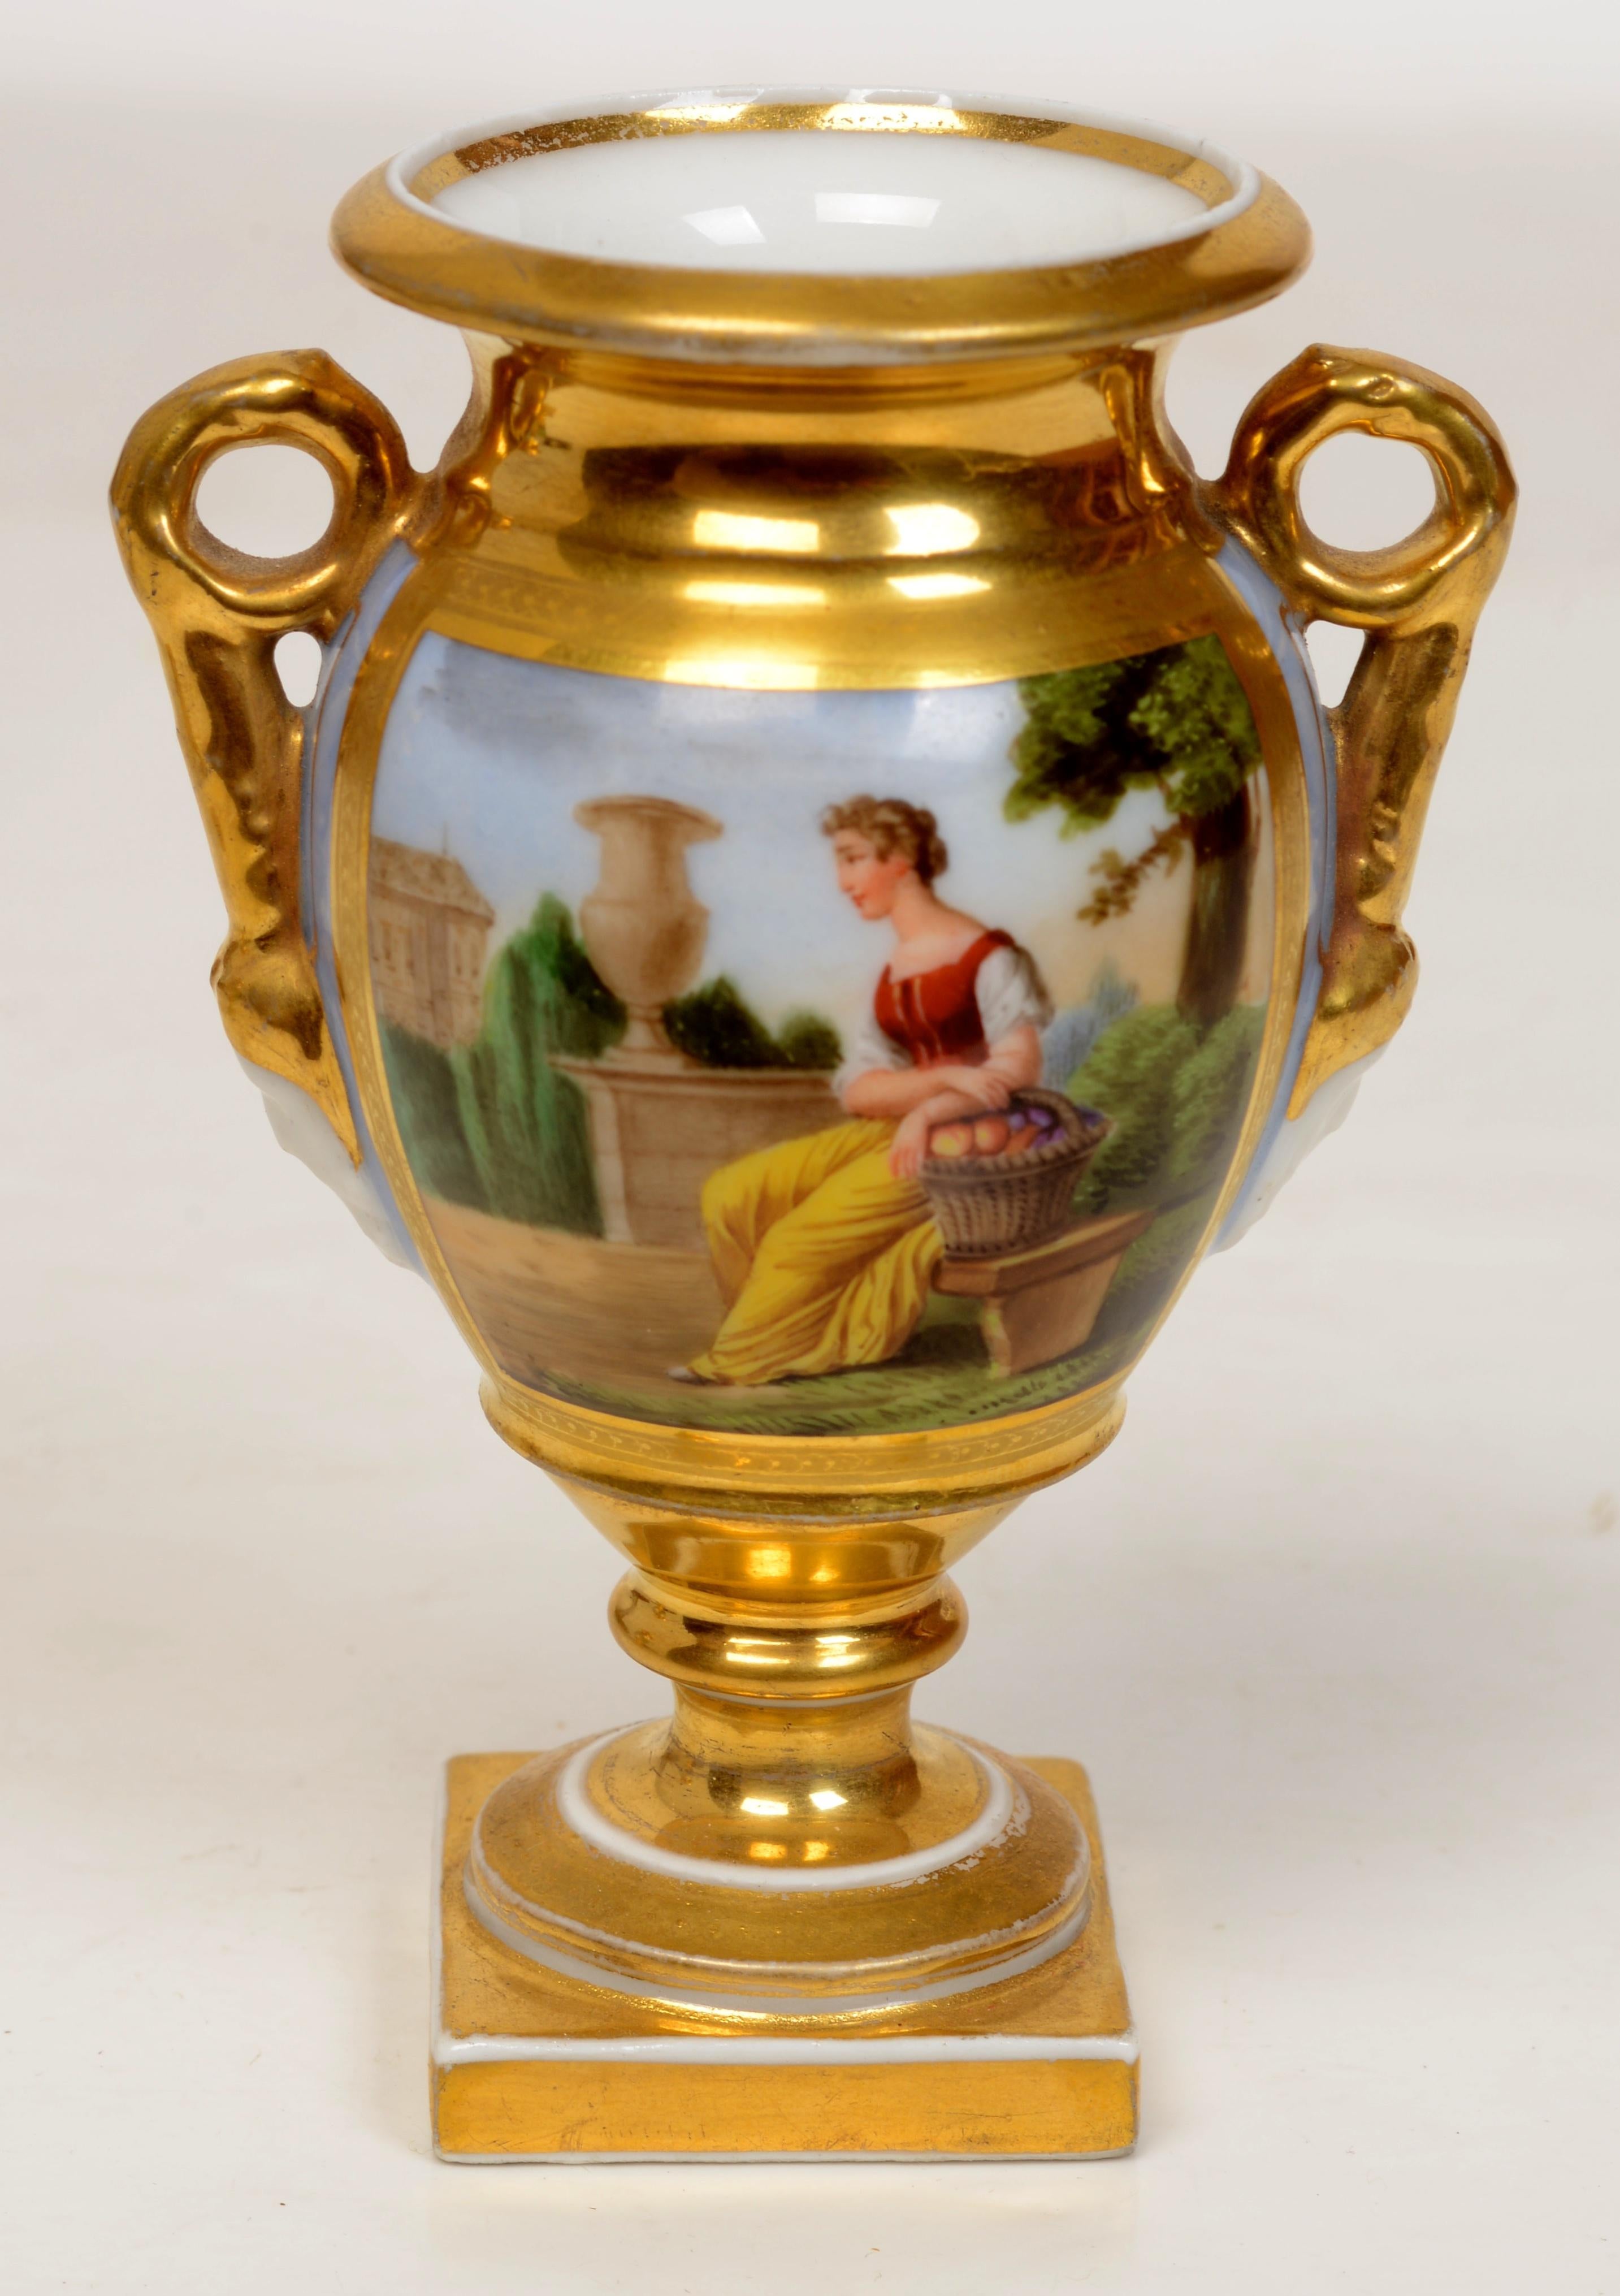 Pr. of Old Paris Miniature, Gilt Decorated Footed Urns With Garden Scenes, c1800 For Sale 1